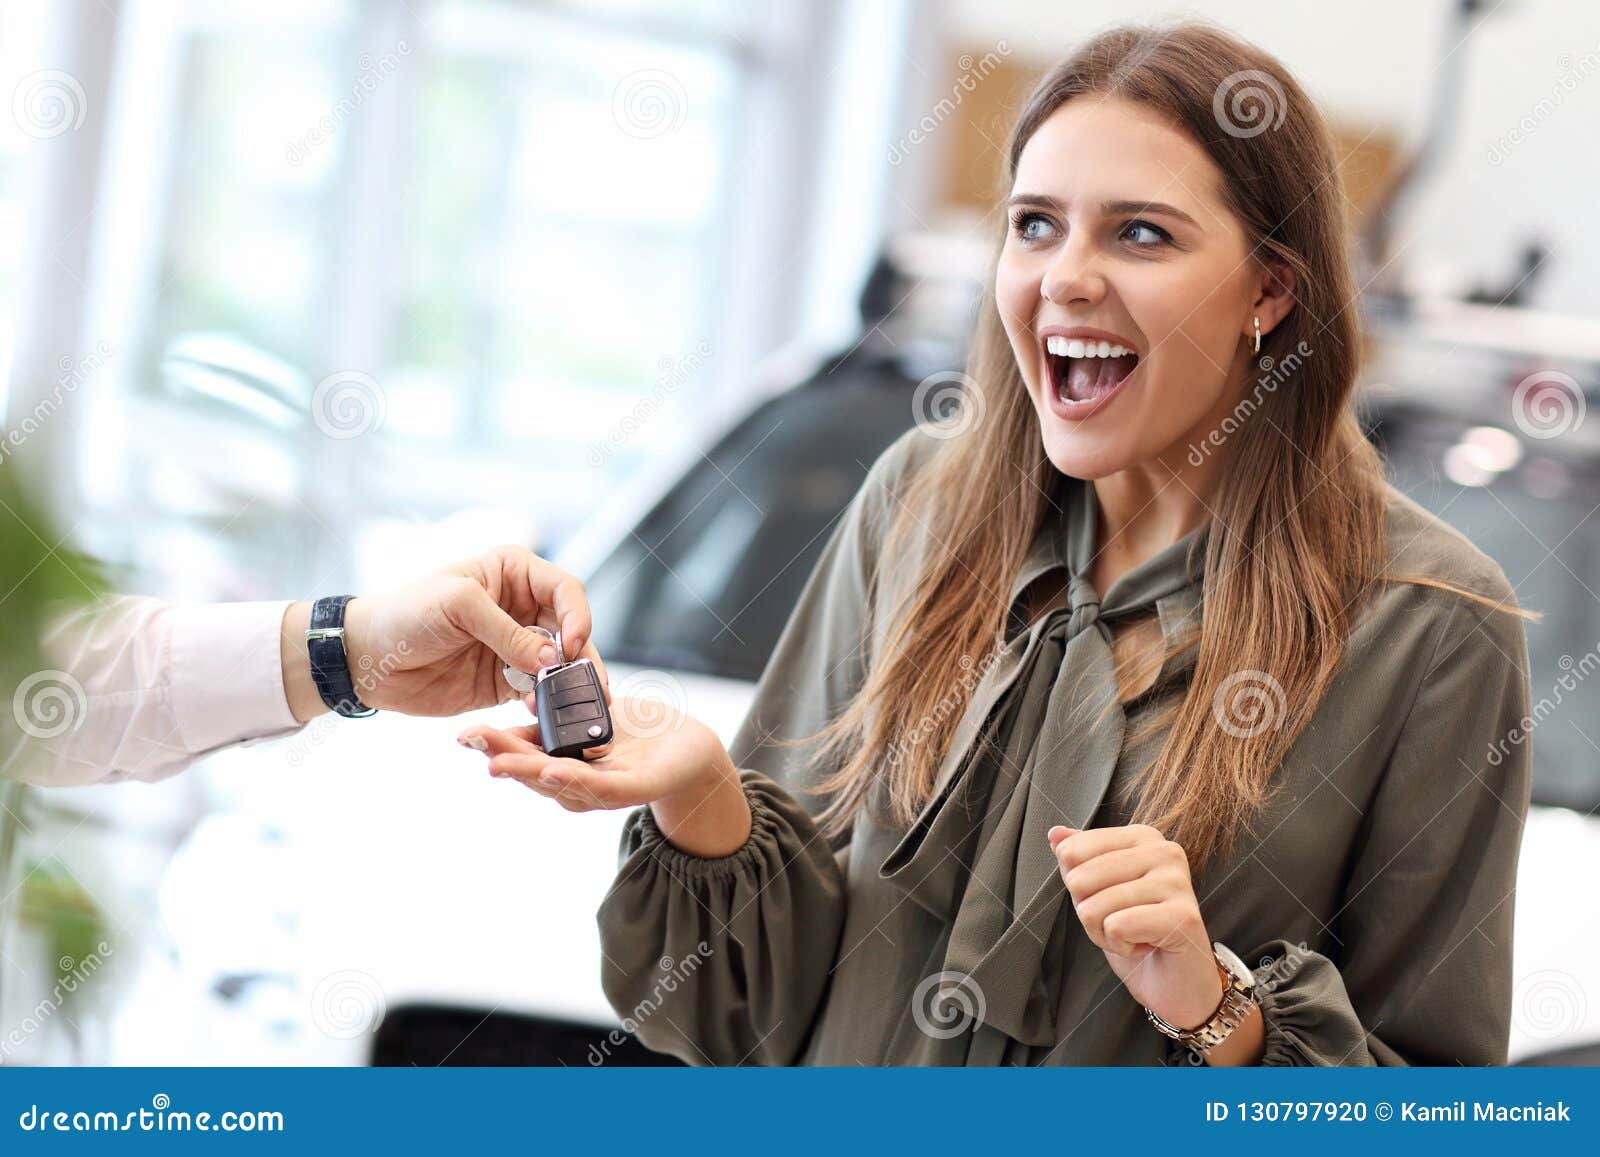 happy young woman buying car in showroom